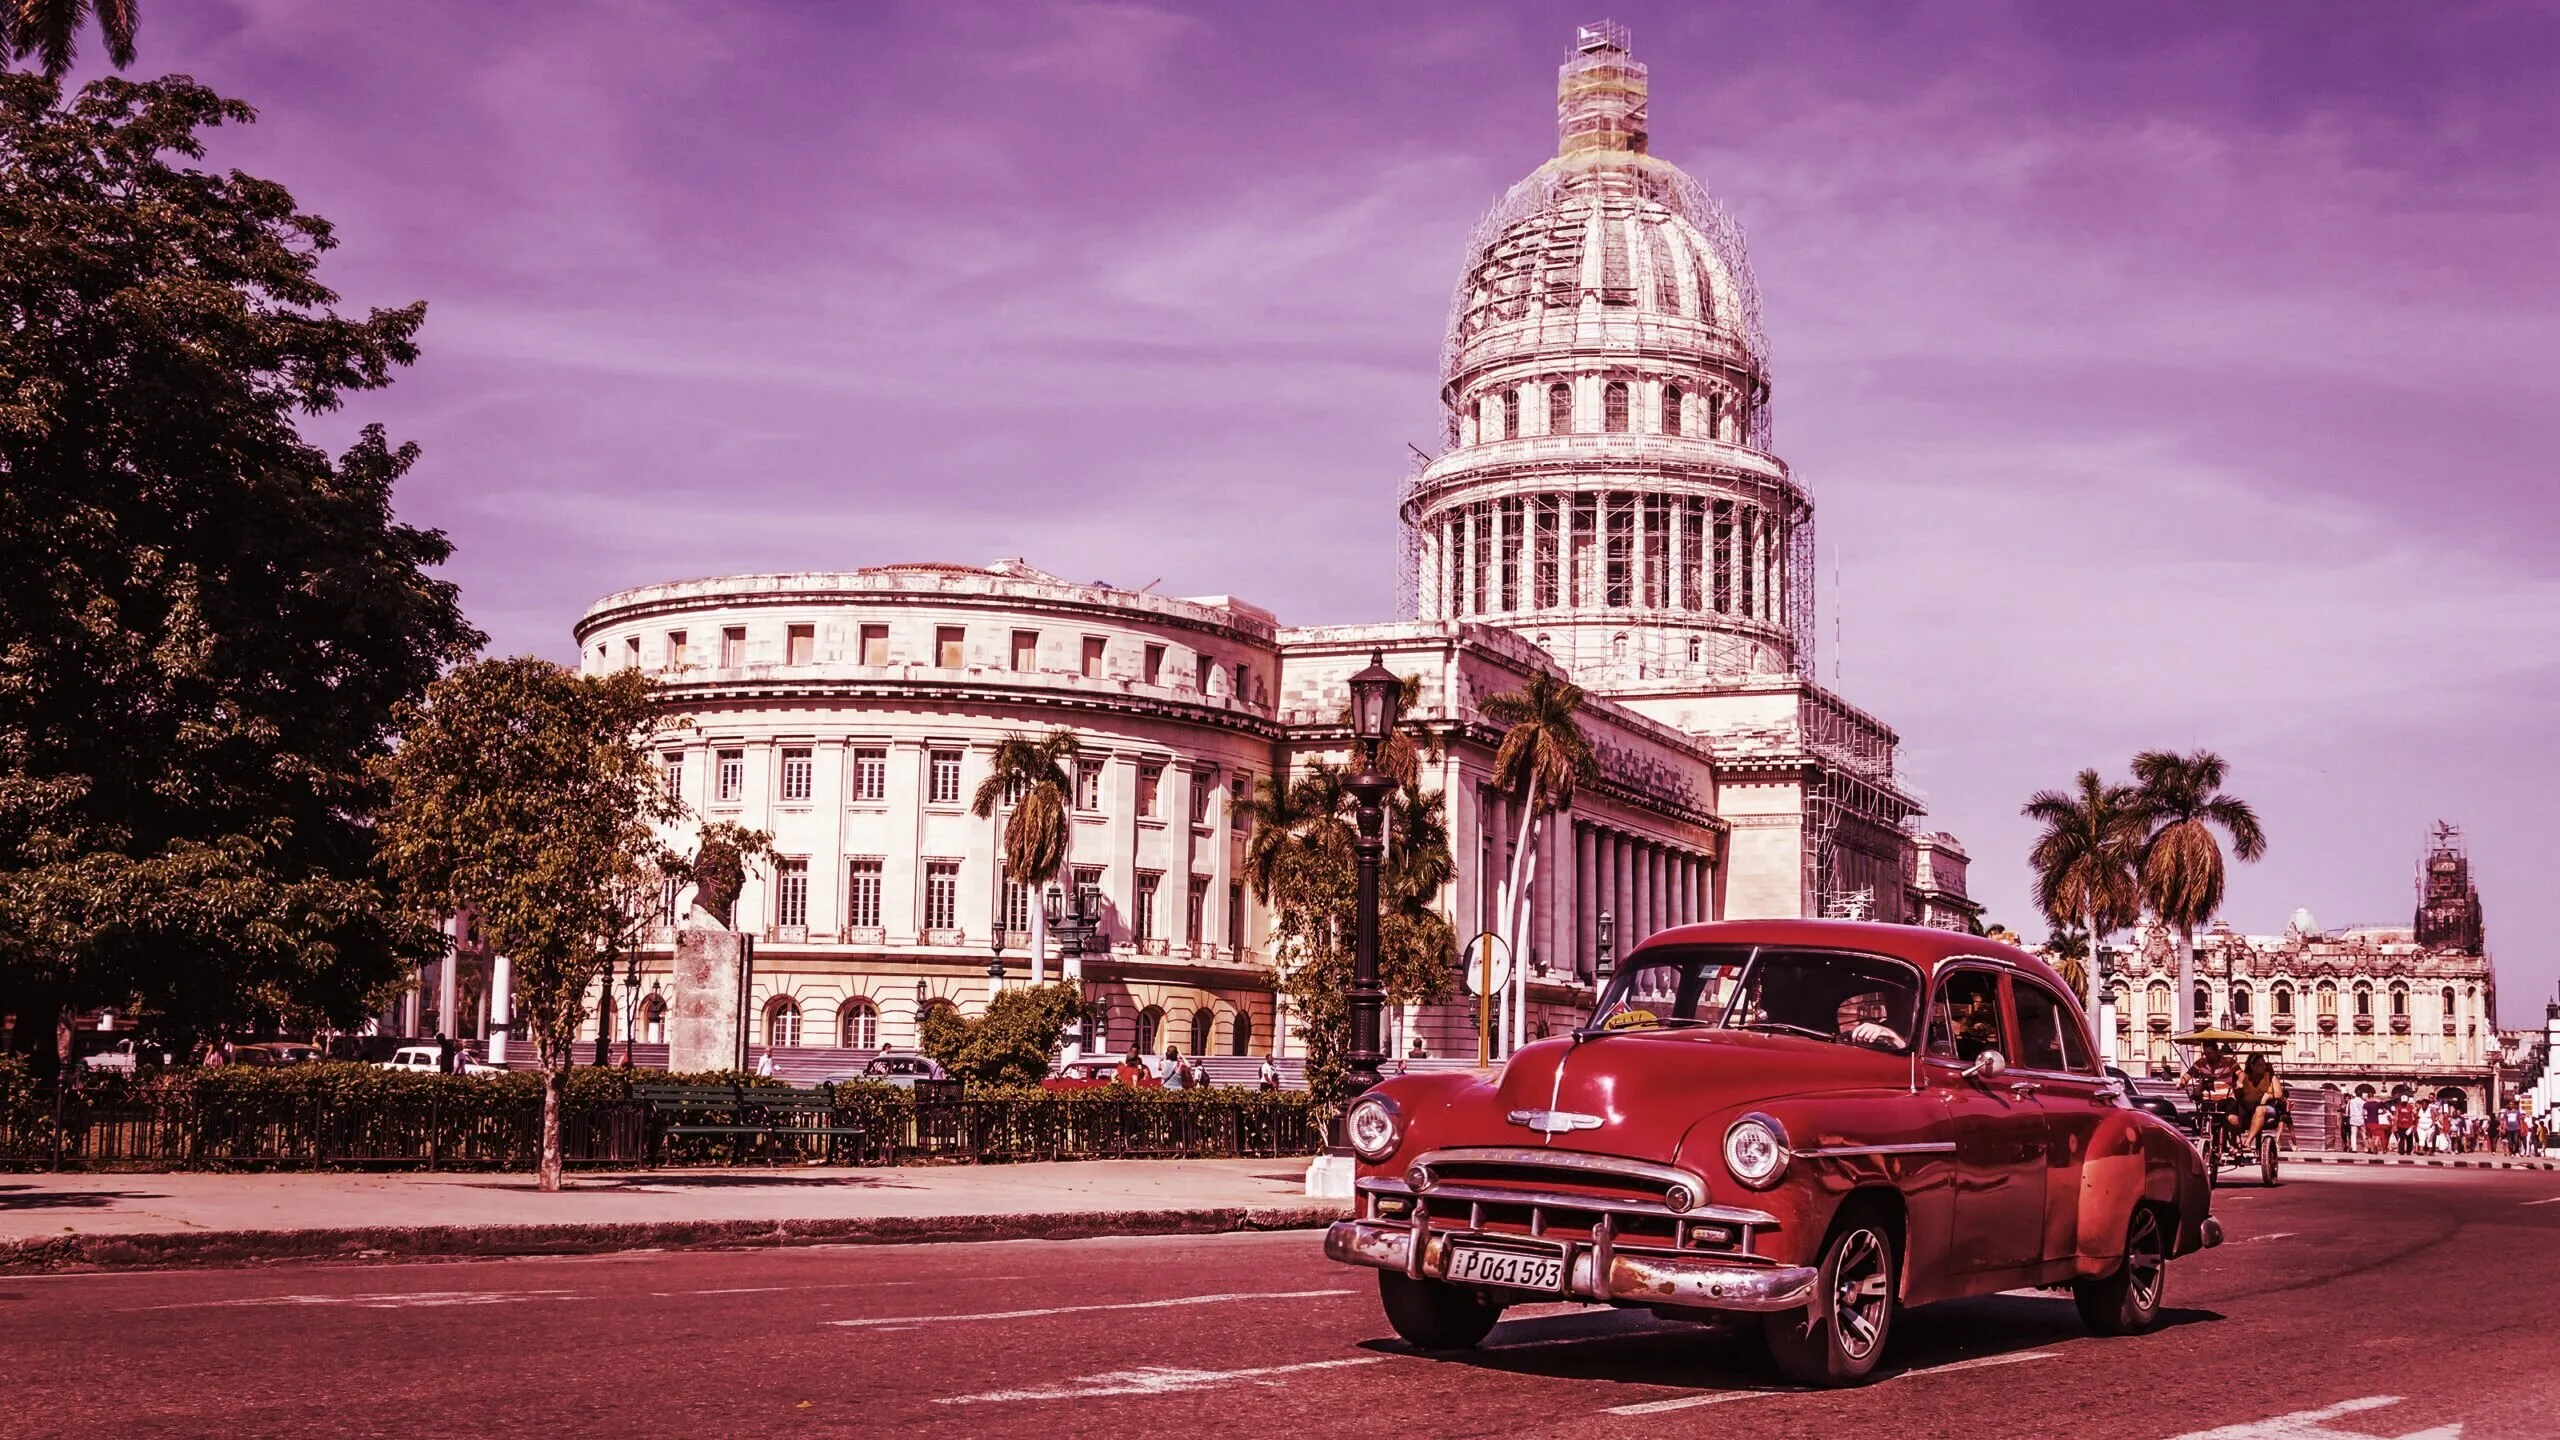 Cubans are determined to join the modern world. Image: Shutterstock